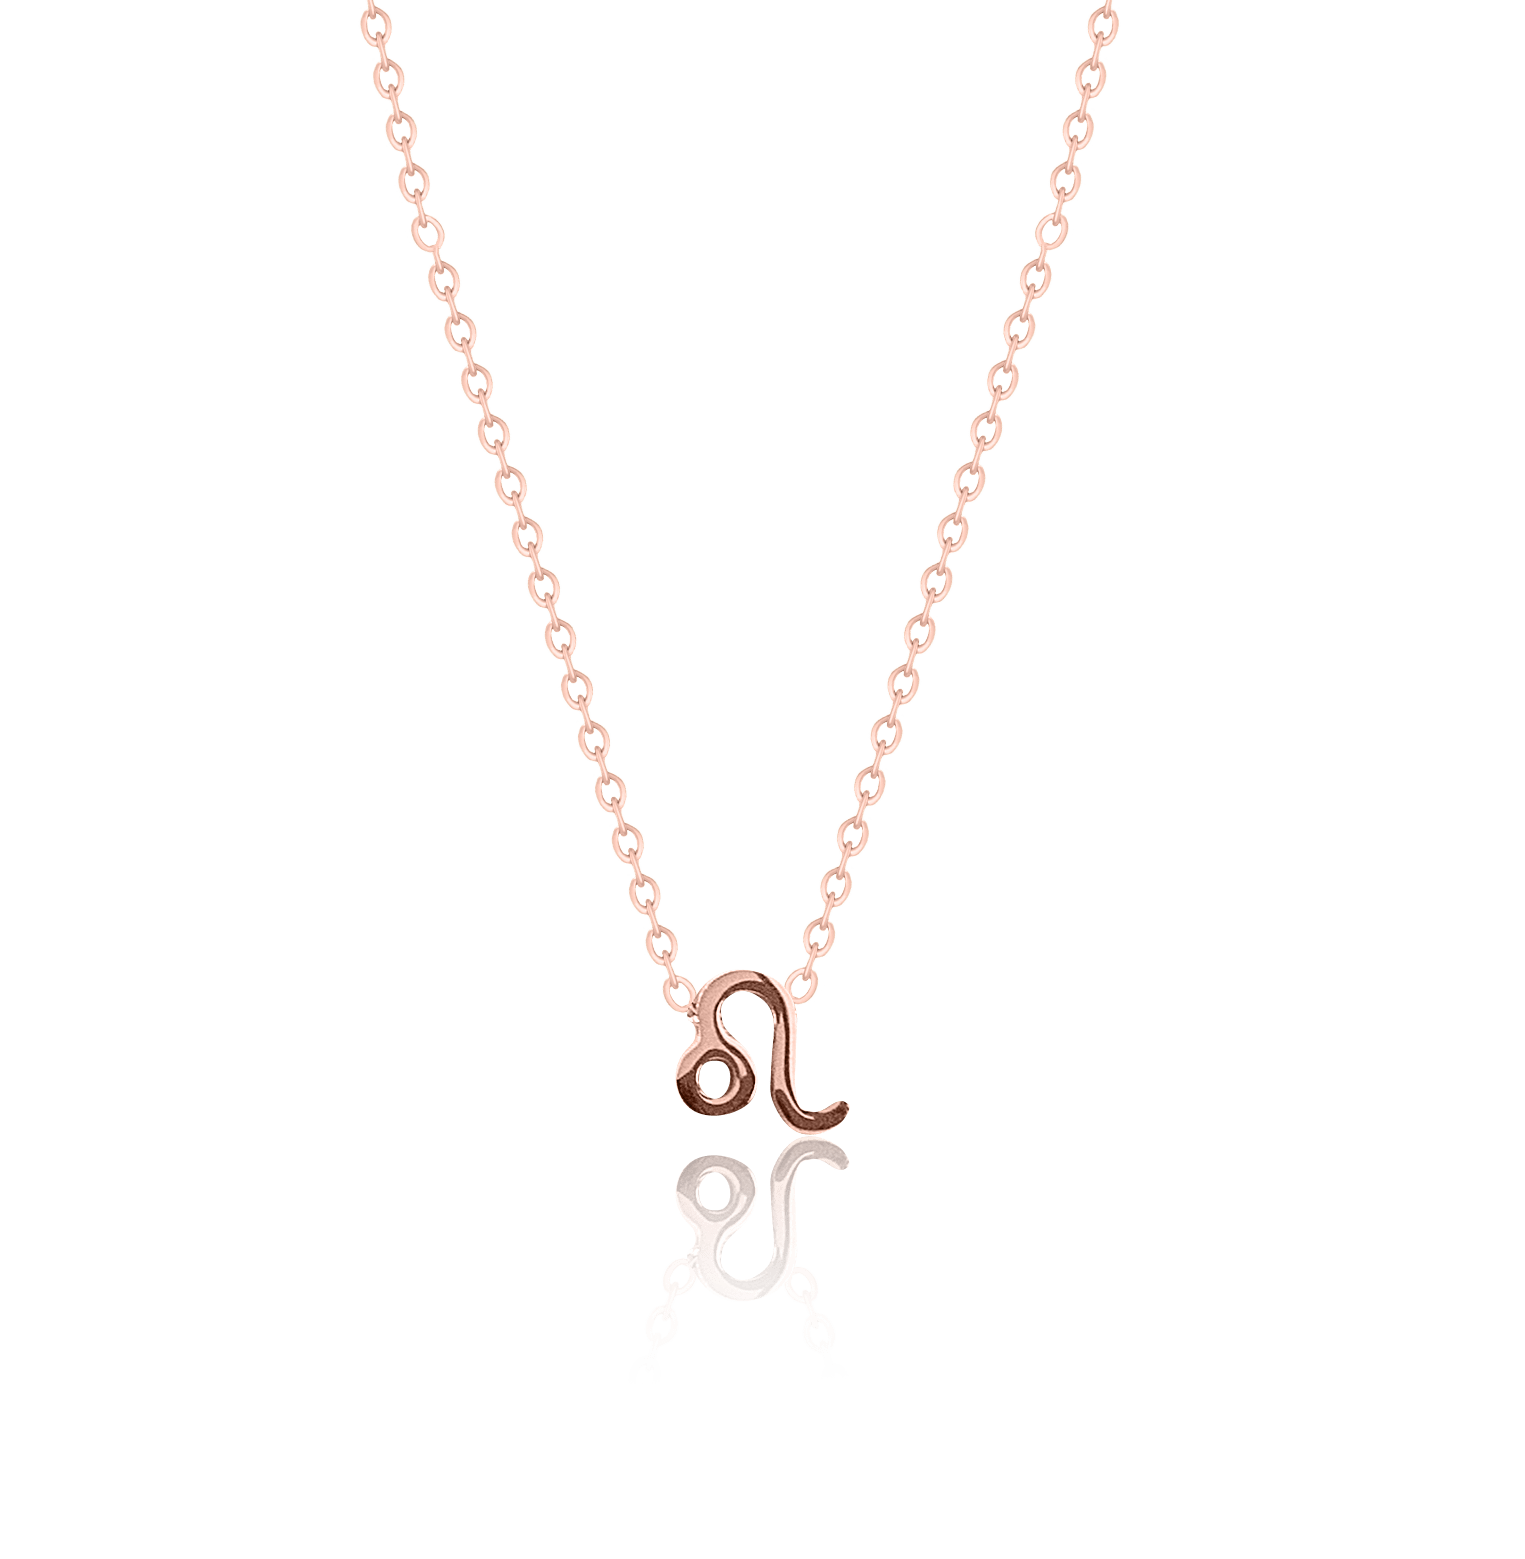 bianco rosso Necklaces Rose Gold Leo - Necklace cyprus greece jewelry gift free shipping europe worldwide